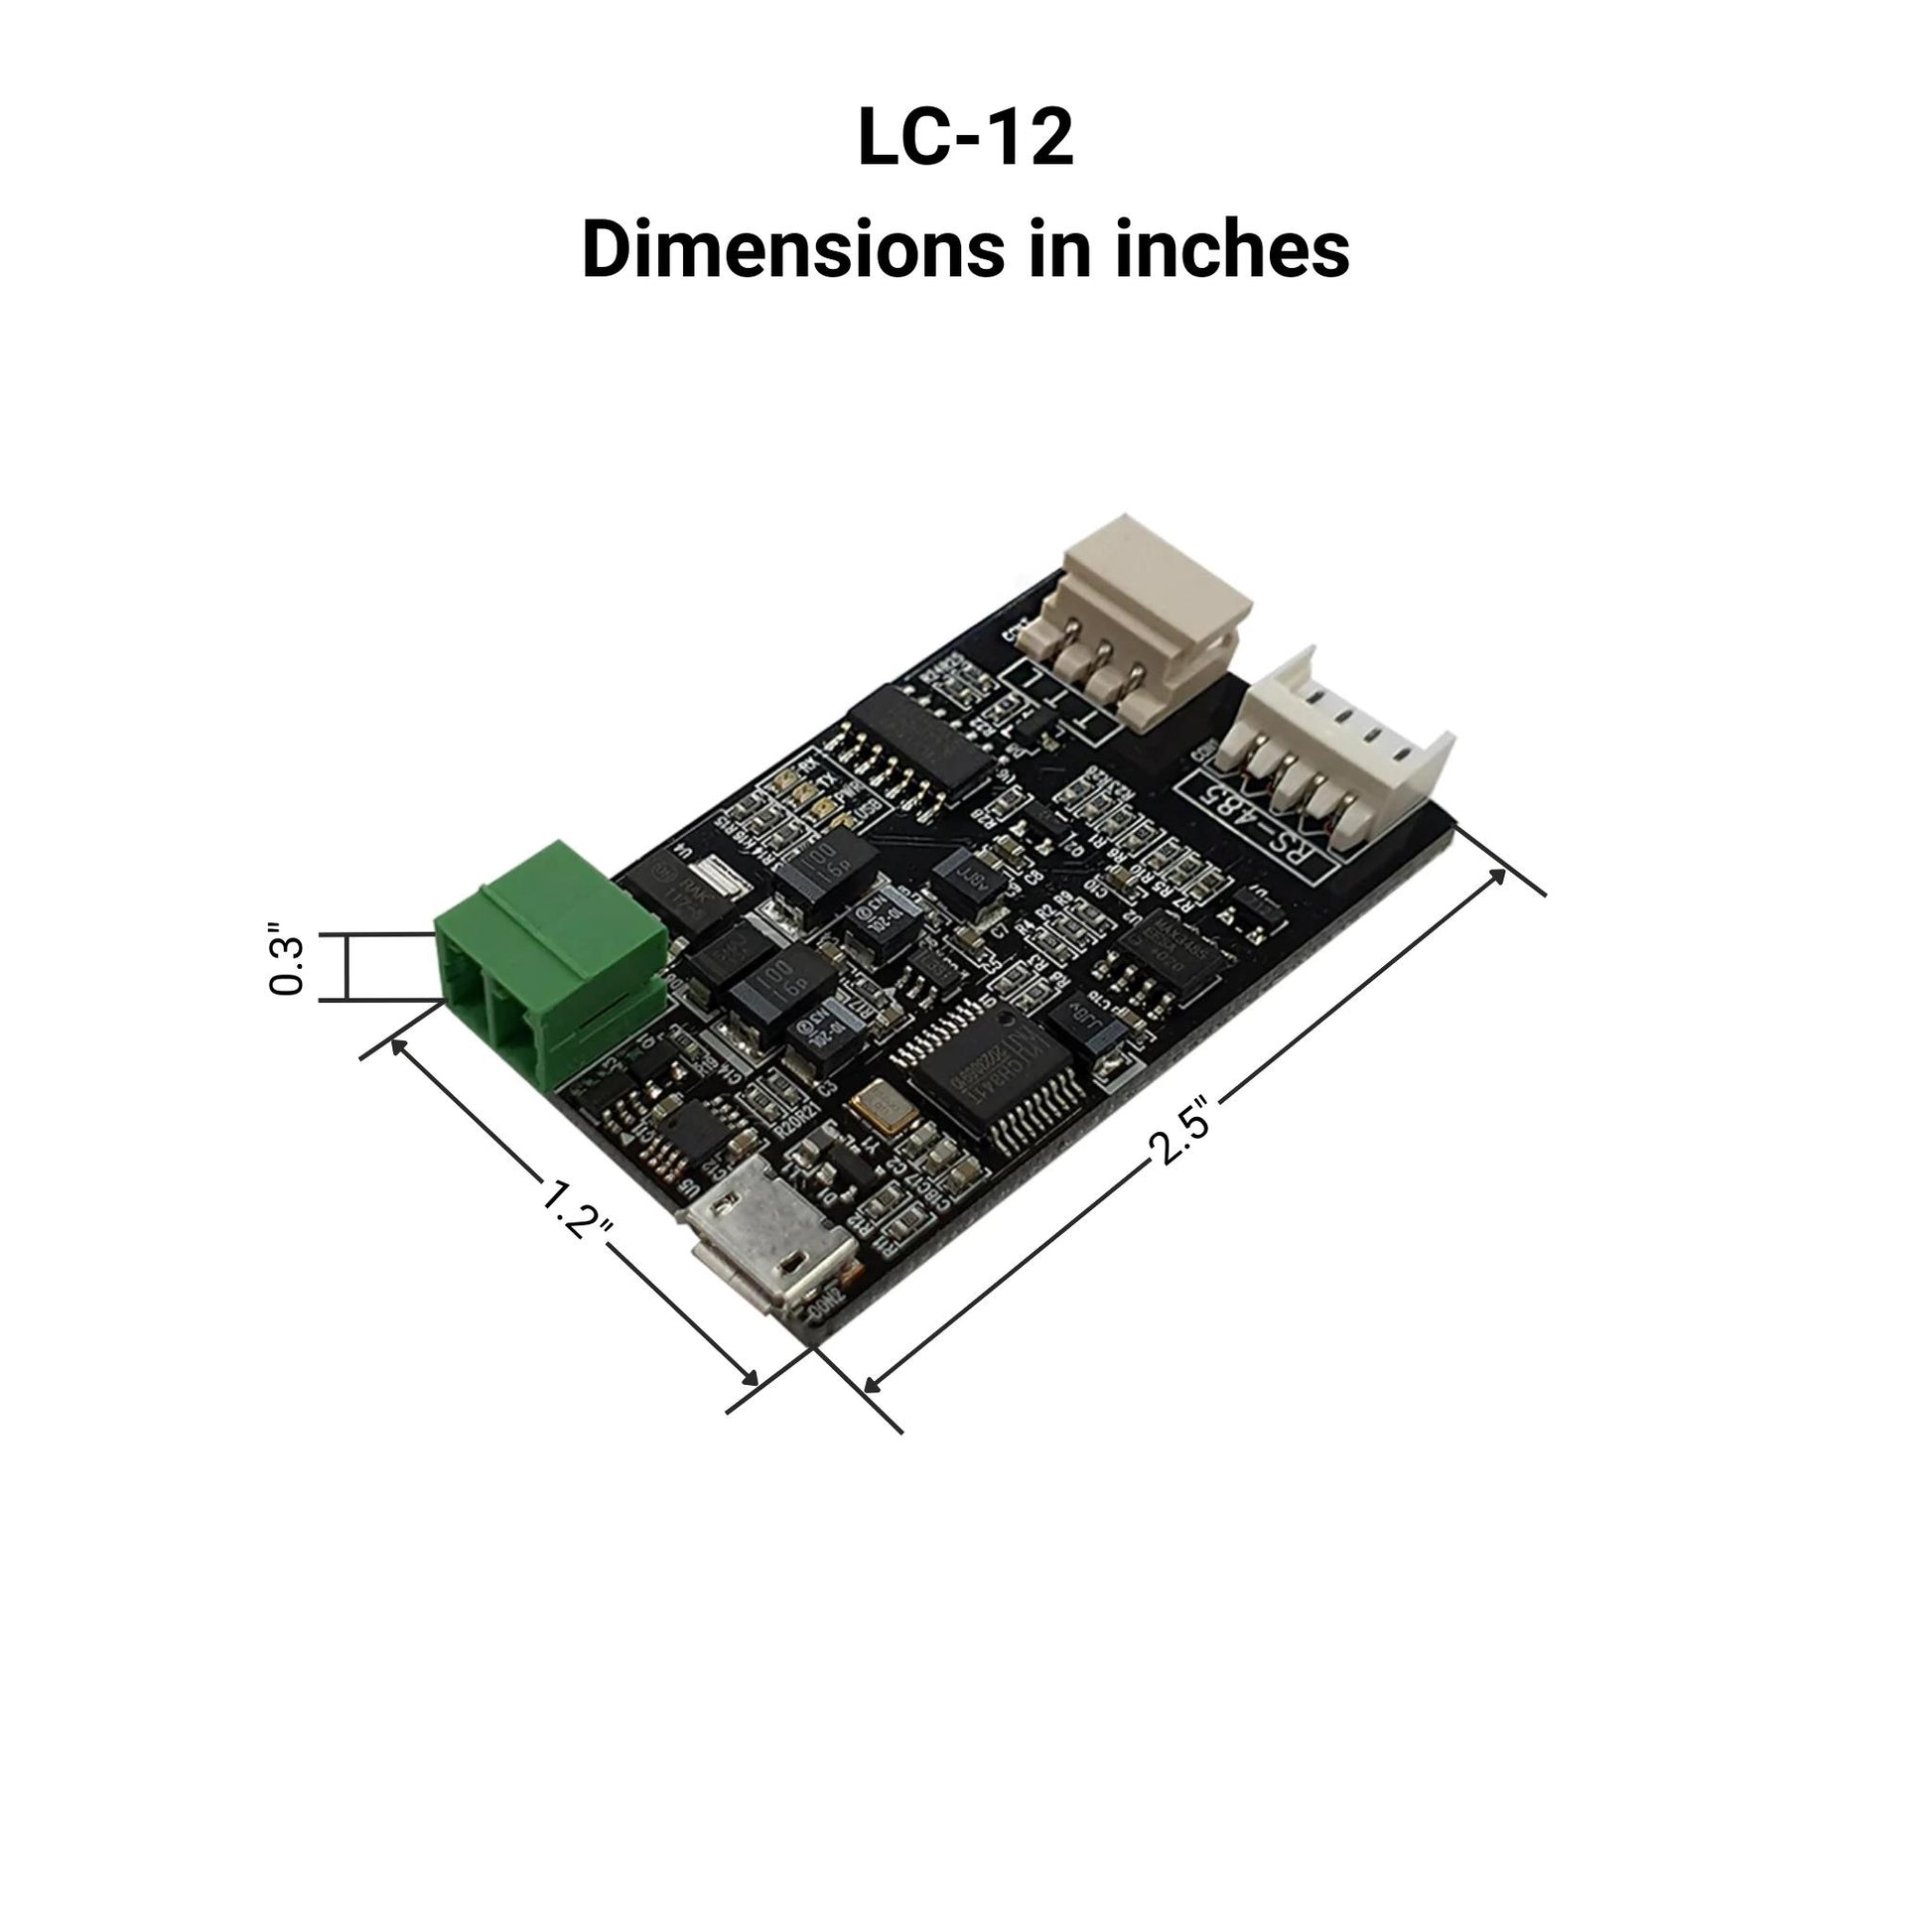 PC USB interface controller dimensions in inches